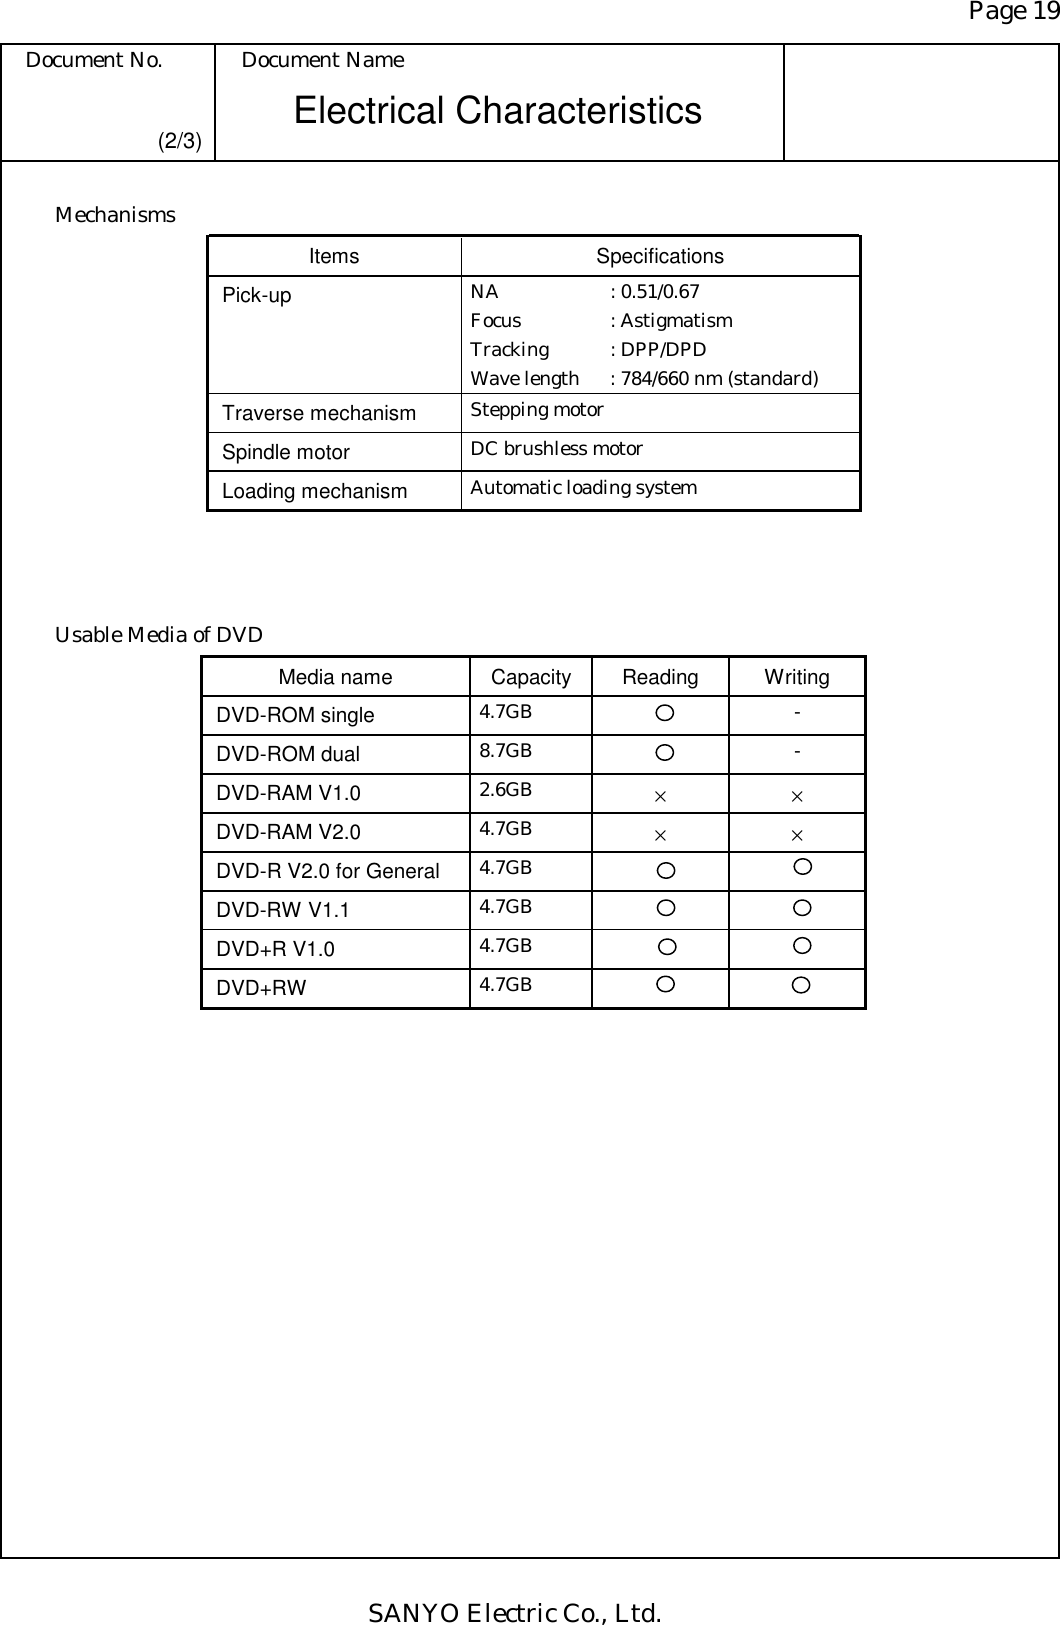 Page 19 Document No.  Document Name SANYO Electric Co., Ltd. Electrical Characteristics (2/3) Mechanisms            Usable Media of DVD       Items Specifications Pick-up  NA   : 0.51/0.67 Focus : Astigmatism Tracking : DPP/DPD Wave length  : 784/660 nm (standard) Traverse mechanism  Stepping motor Spindle motor  DC brushless motor Loading mechanism  Automatic loading system Media name  Capacity  Reading  Writing DVD-ROM single  4.7GB   - DVD-ROM dual  8.7GB   - DVD-RAM V1.0  2.6GB  × × DVD-RAM V2.0  4.7GB  × × DVD-R V2.0 for General  4.7GB    DVD-RW V1.1  4.7GB    DVD+R V1.0  4.7GB    DVD+RW  4.7GB    